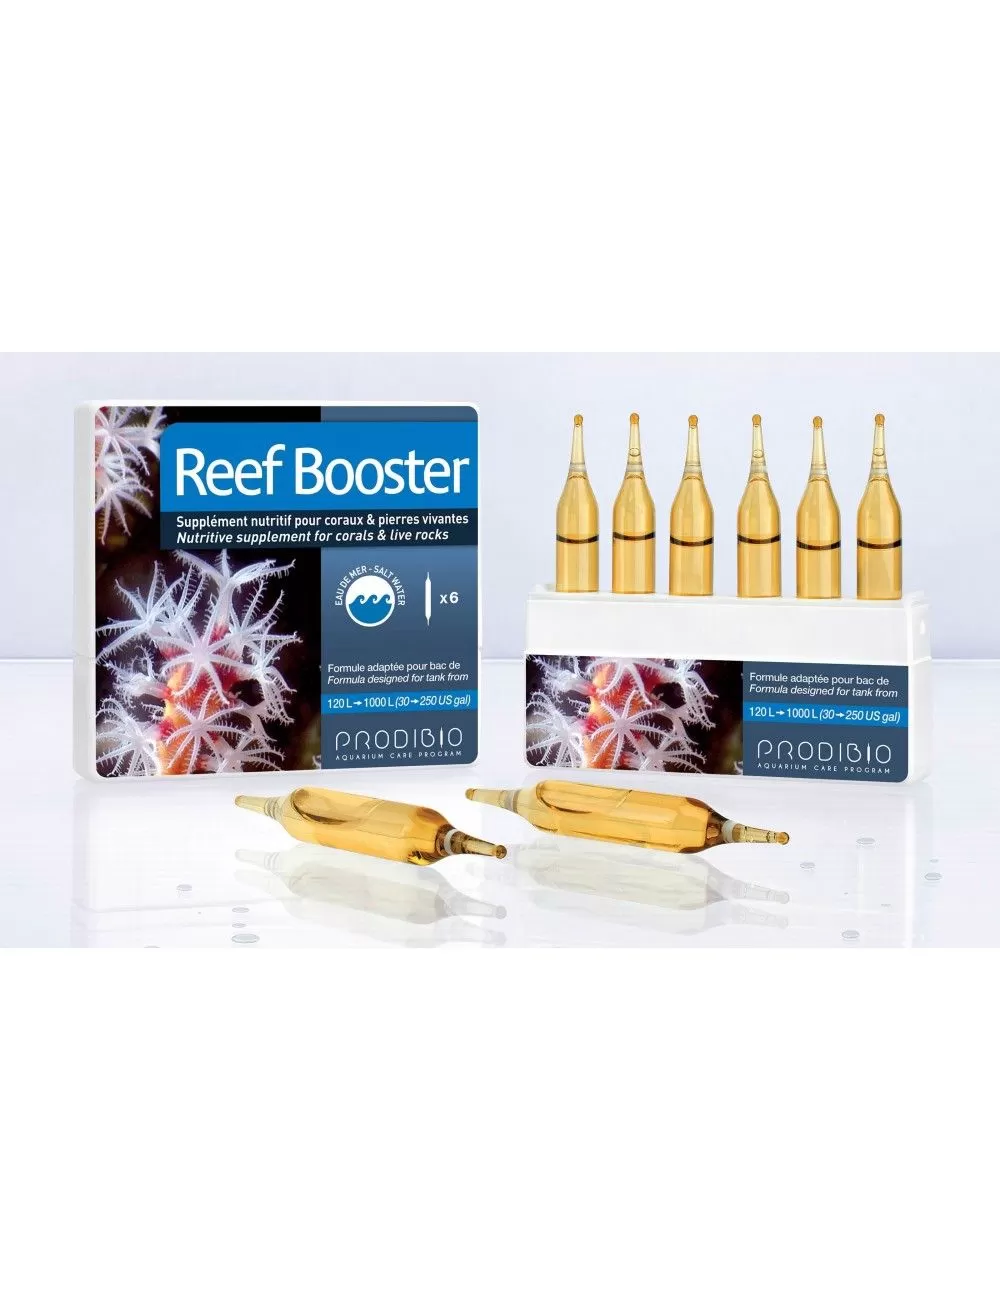 PRODIBIO - Reef Booster - 6 vials - Nutritional supplement for corals